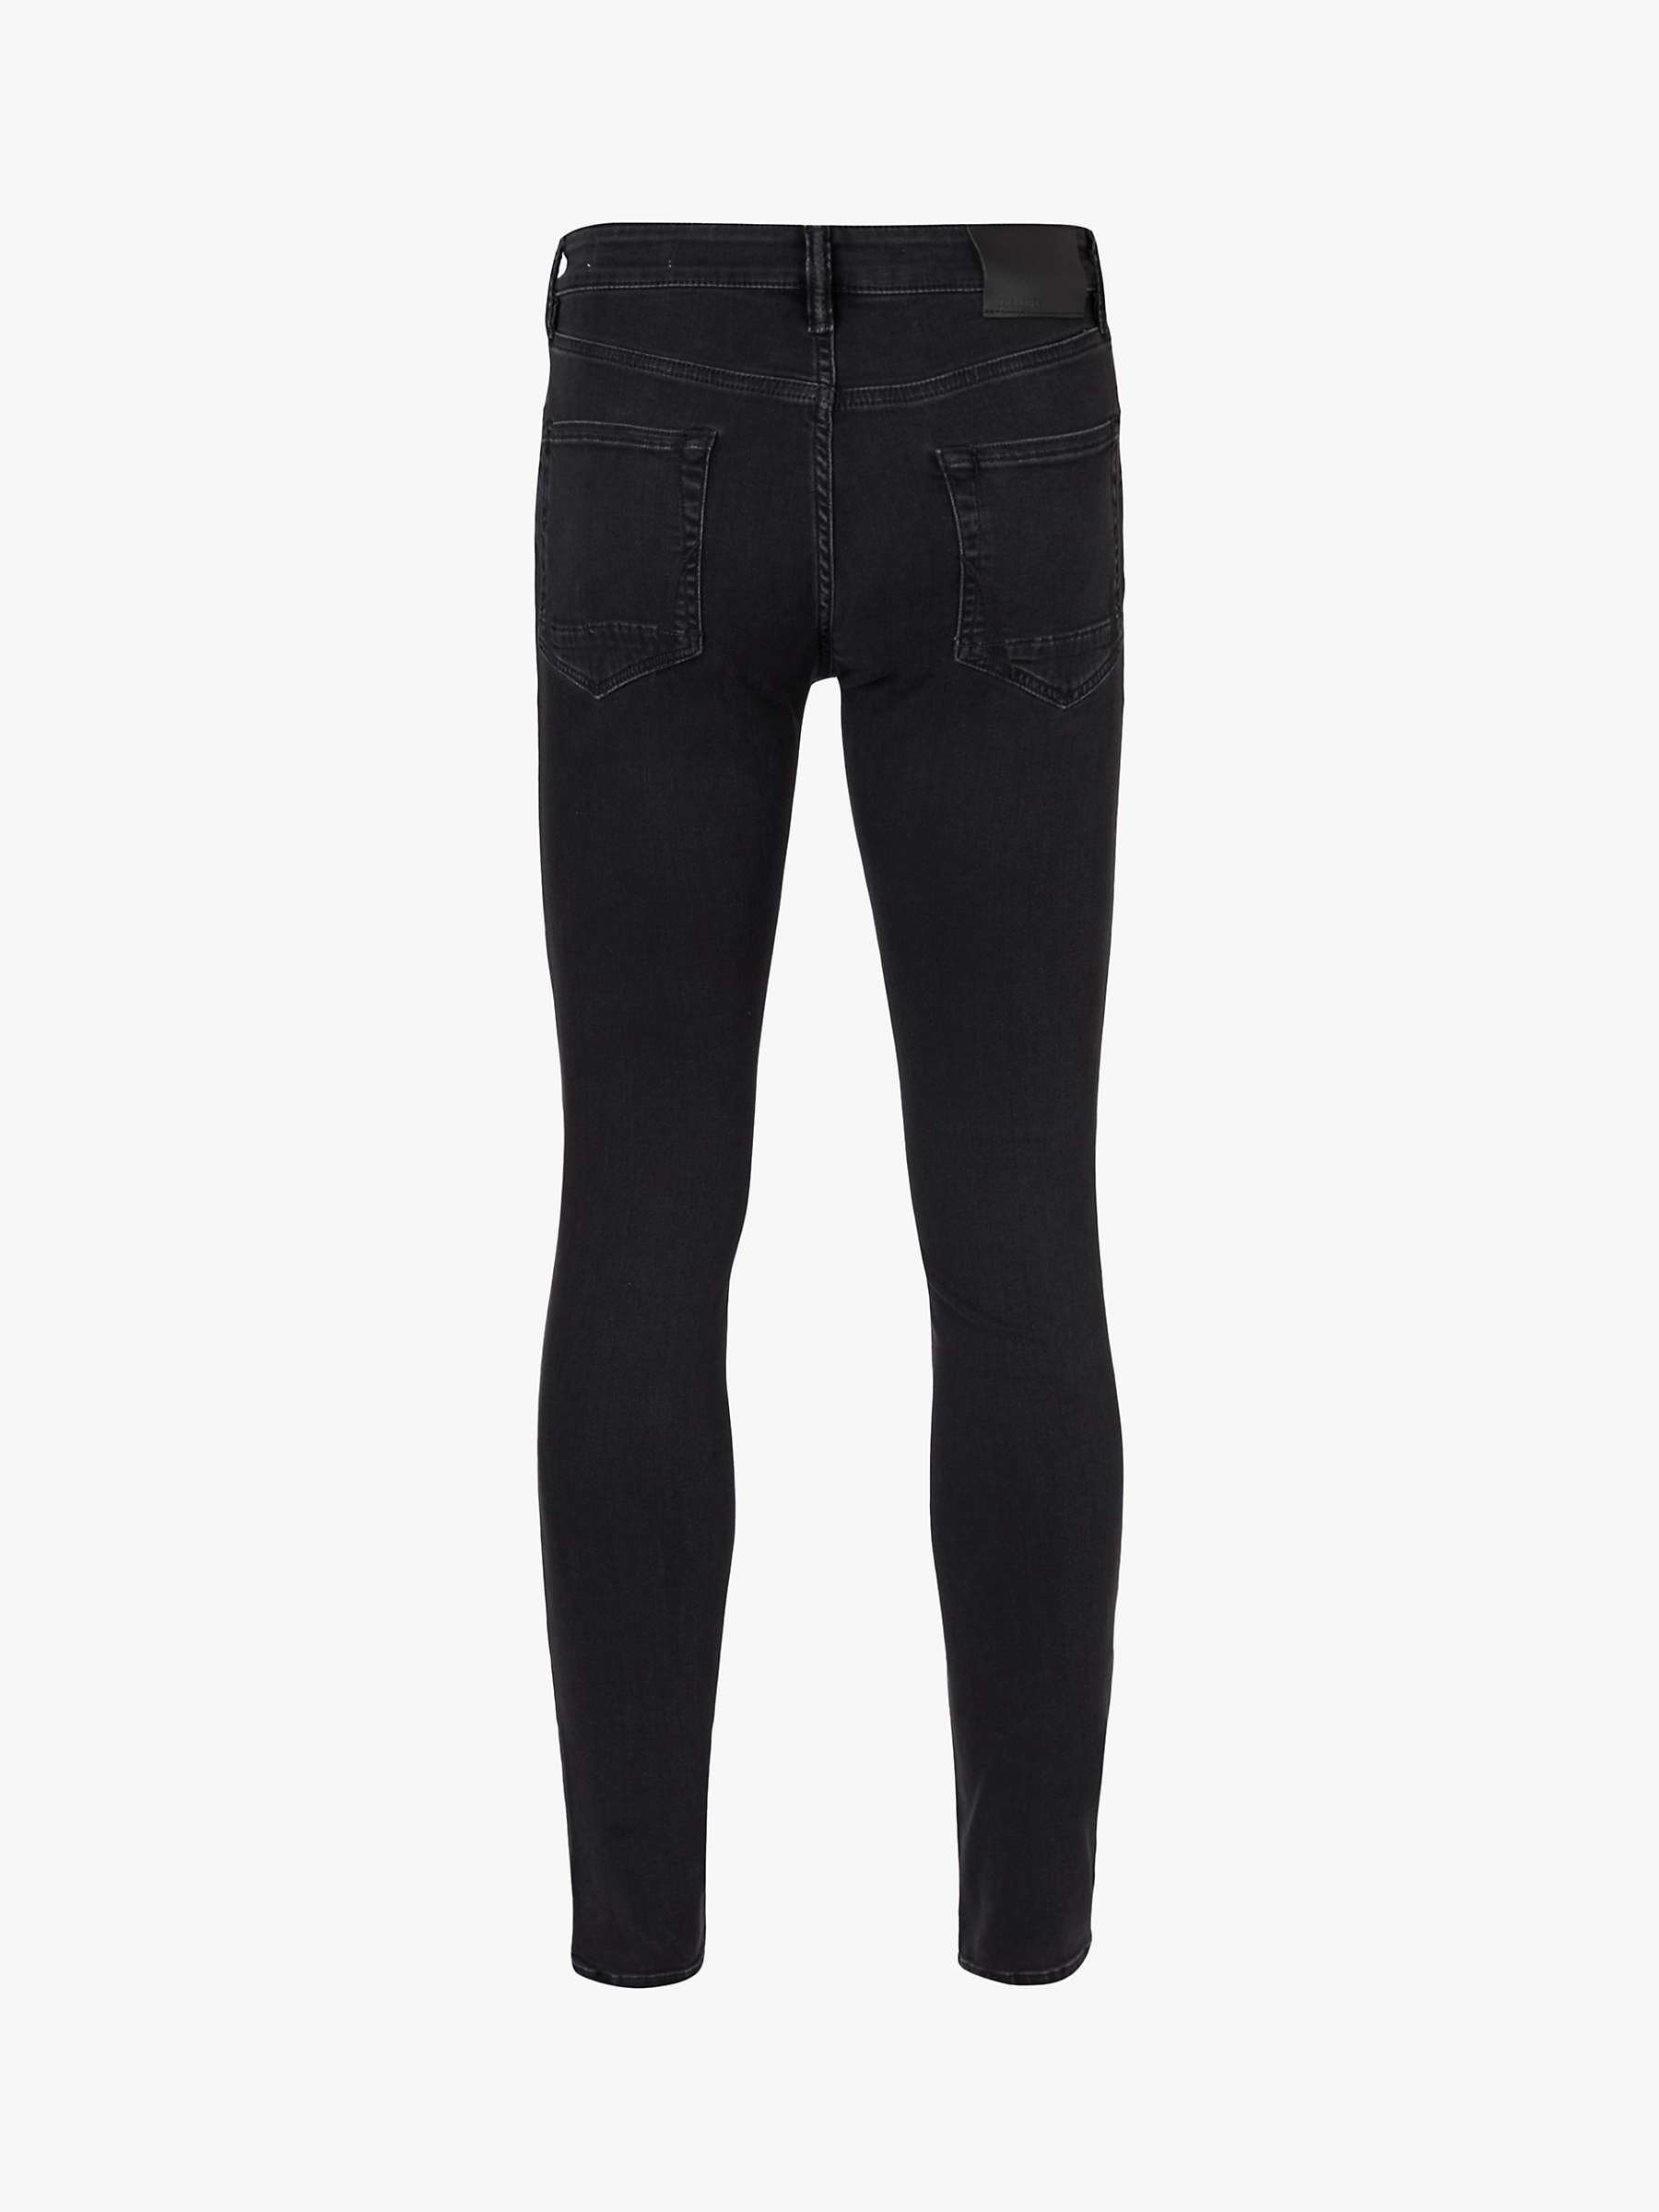 Buy AllSaints Ronnie Skinny Jeans, Washed Black Online at johnlewis.com